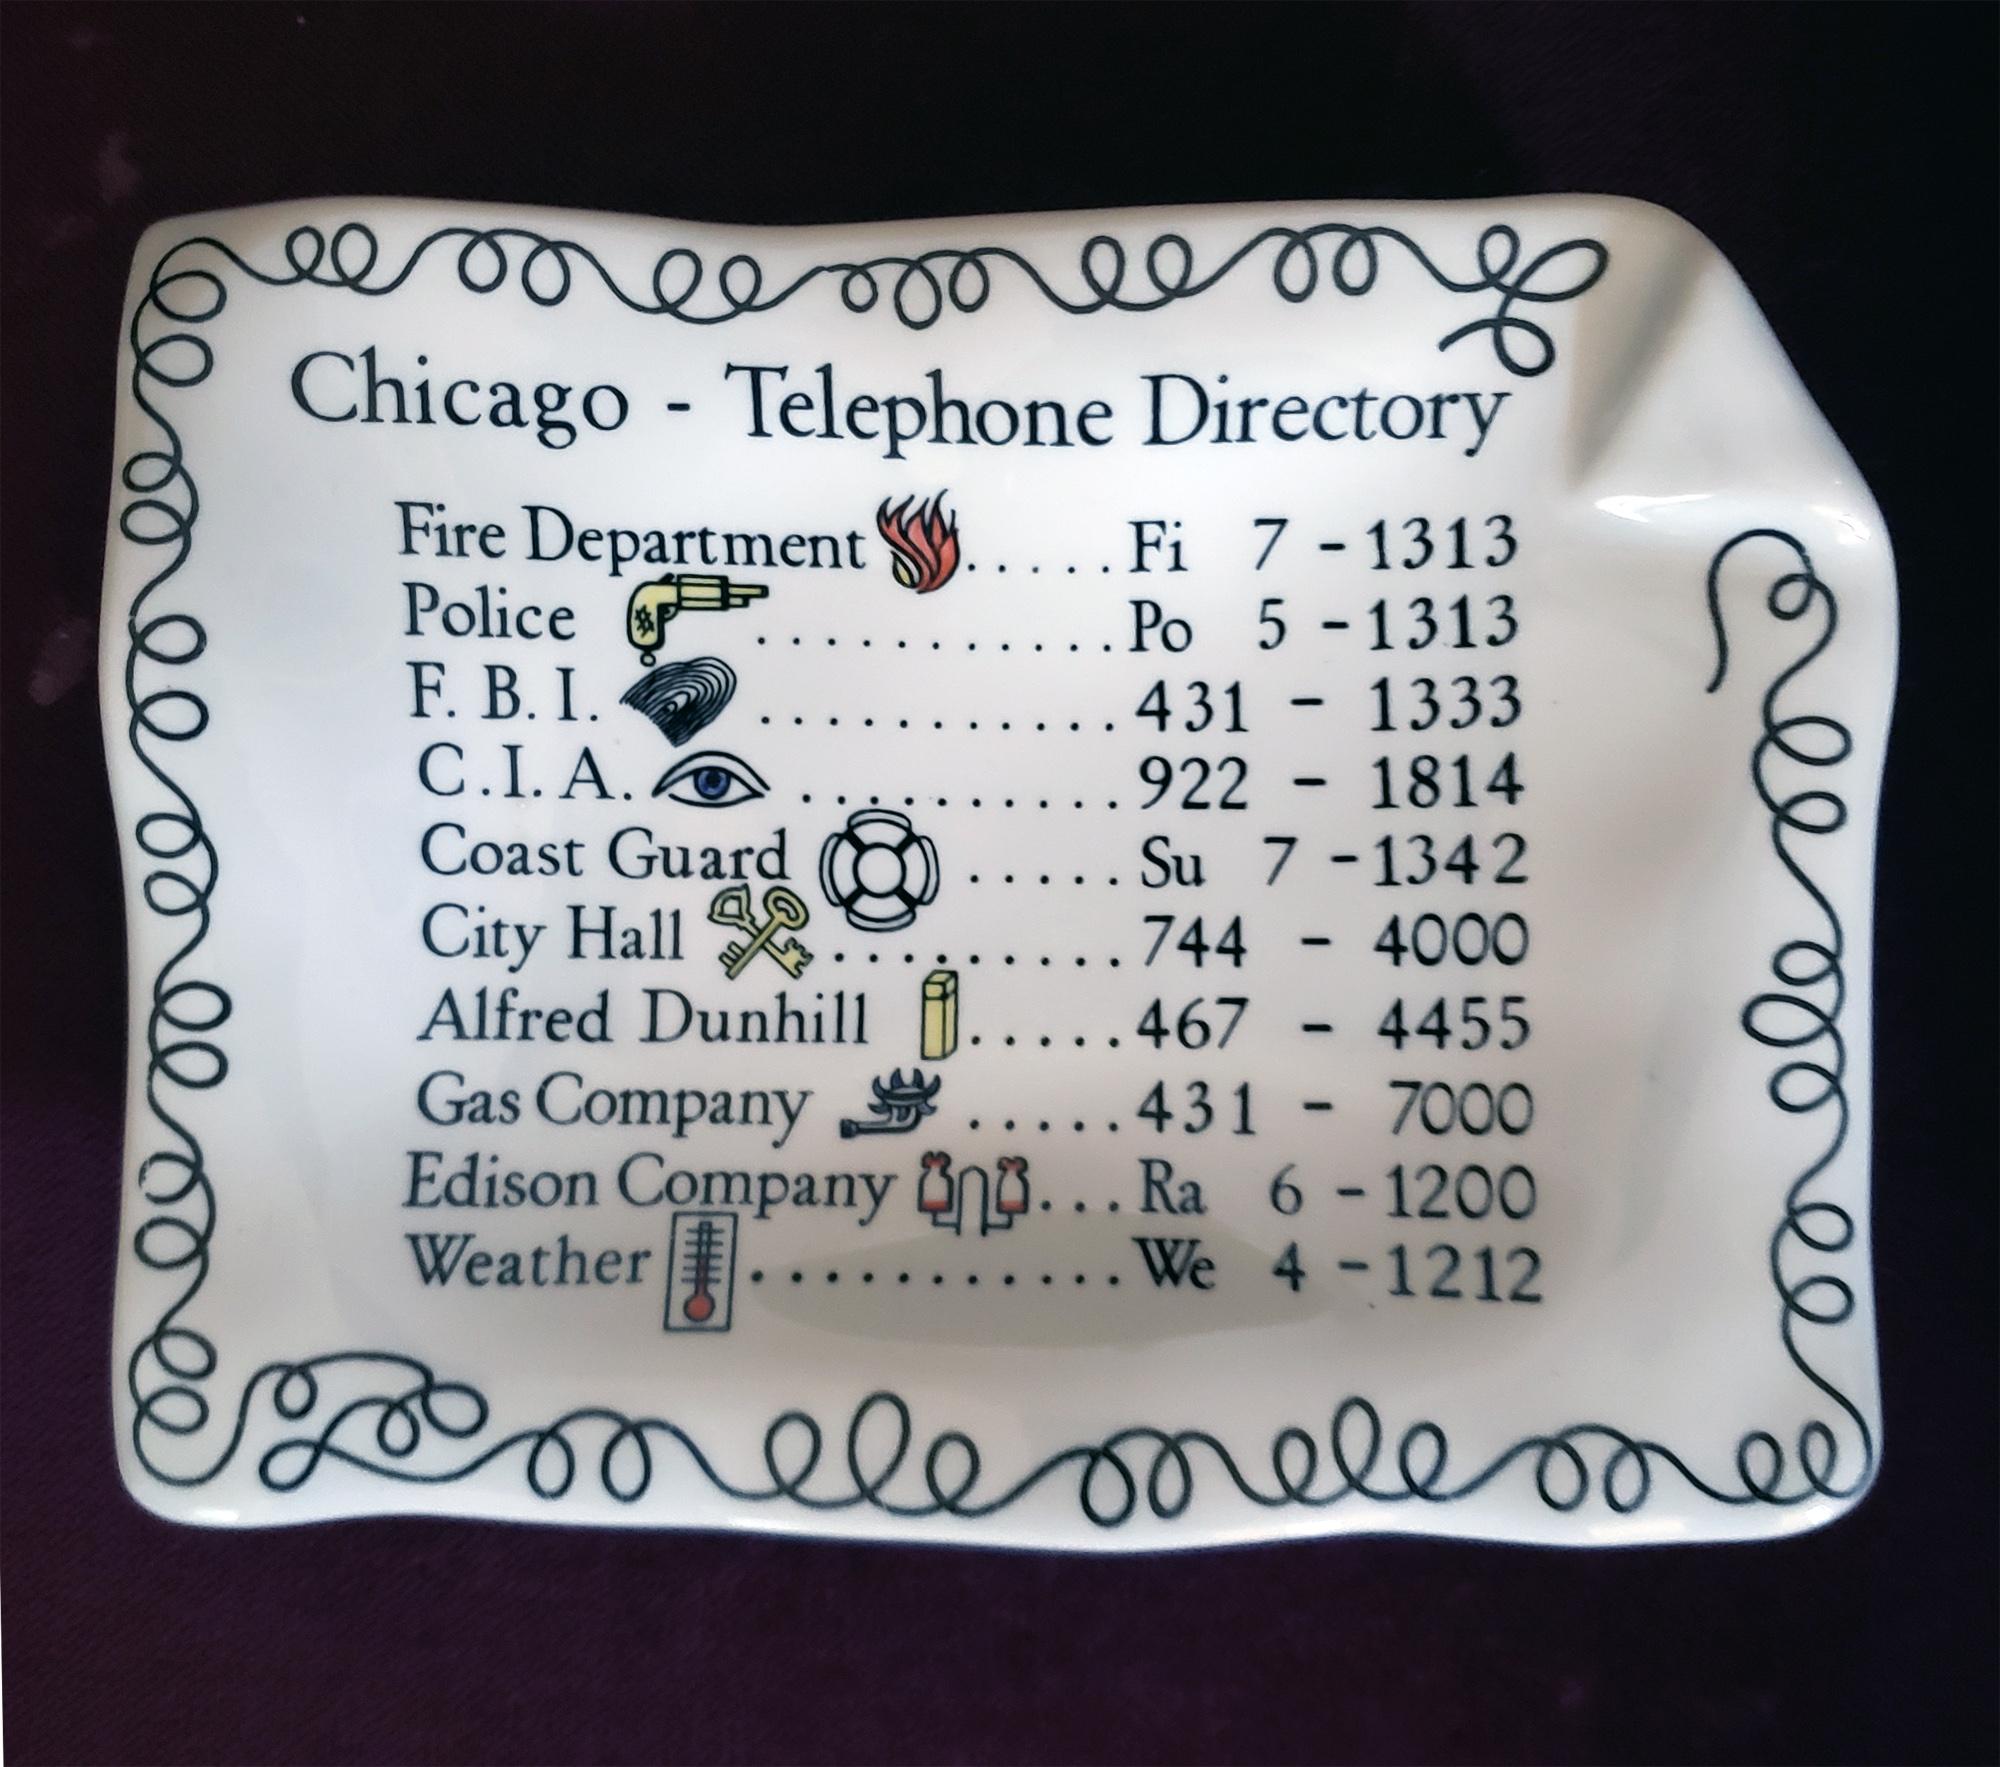 Mid-Century Modern Piero Fornasetti Ceramic Ashtray with Chicago Phone Numbers